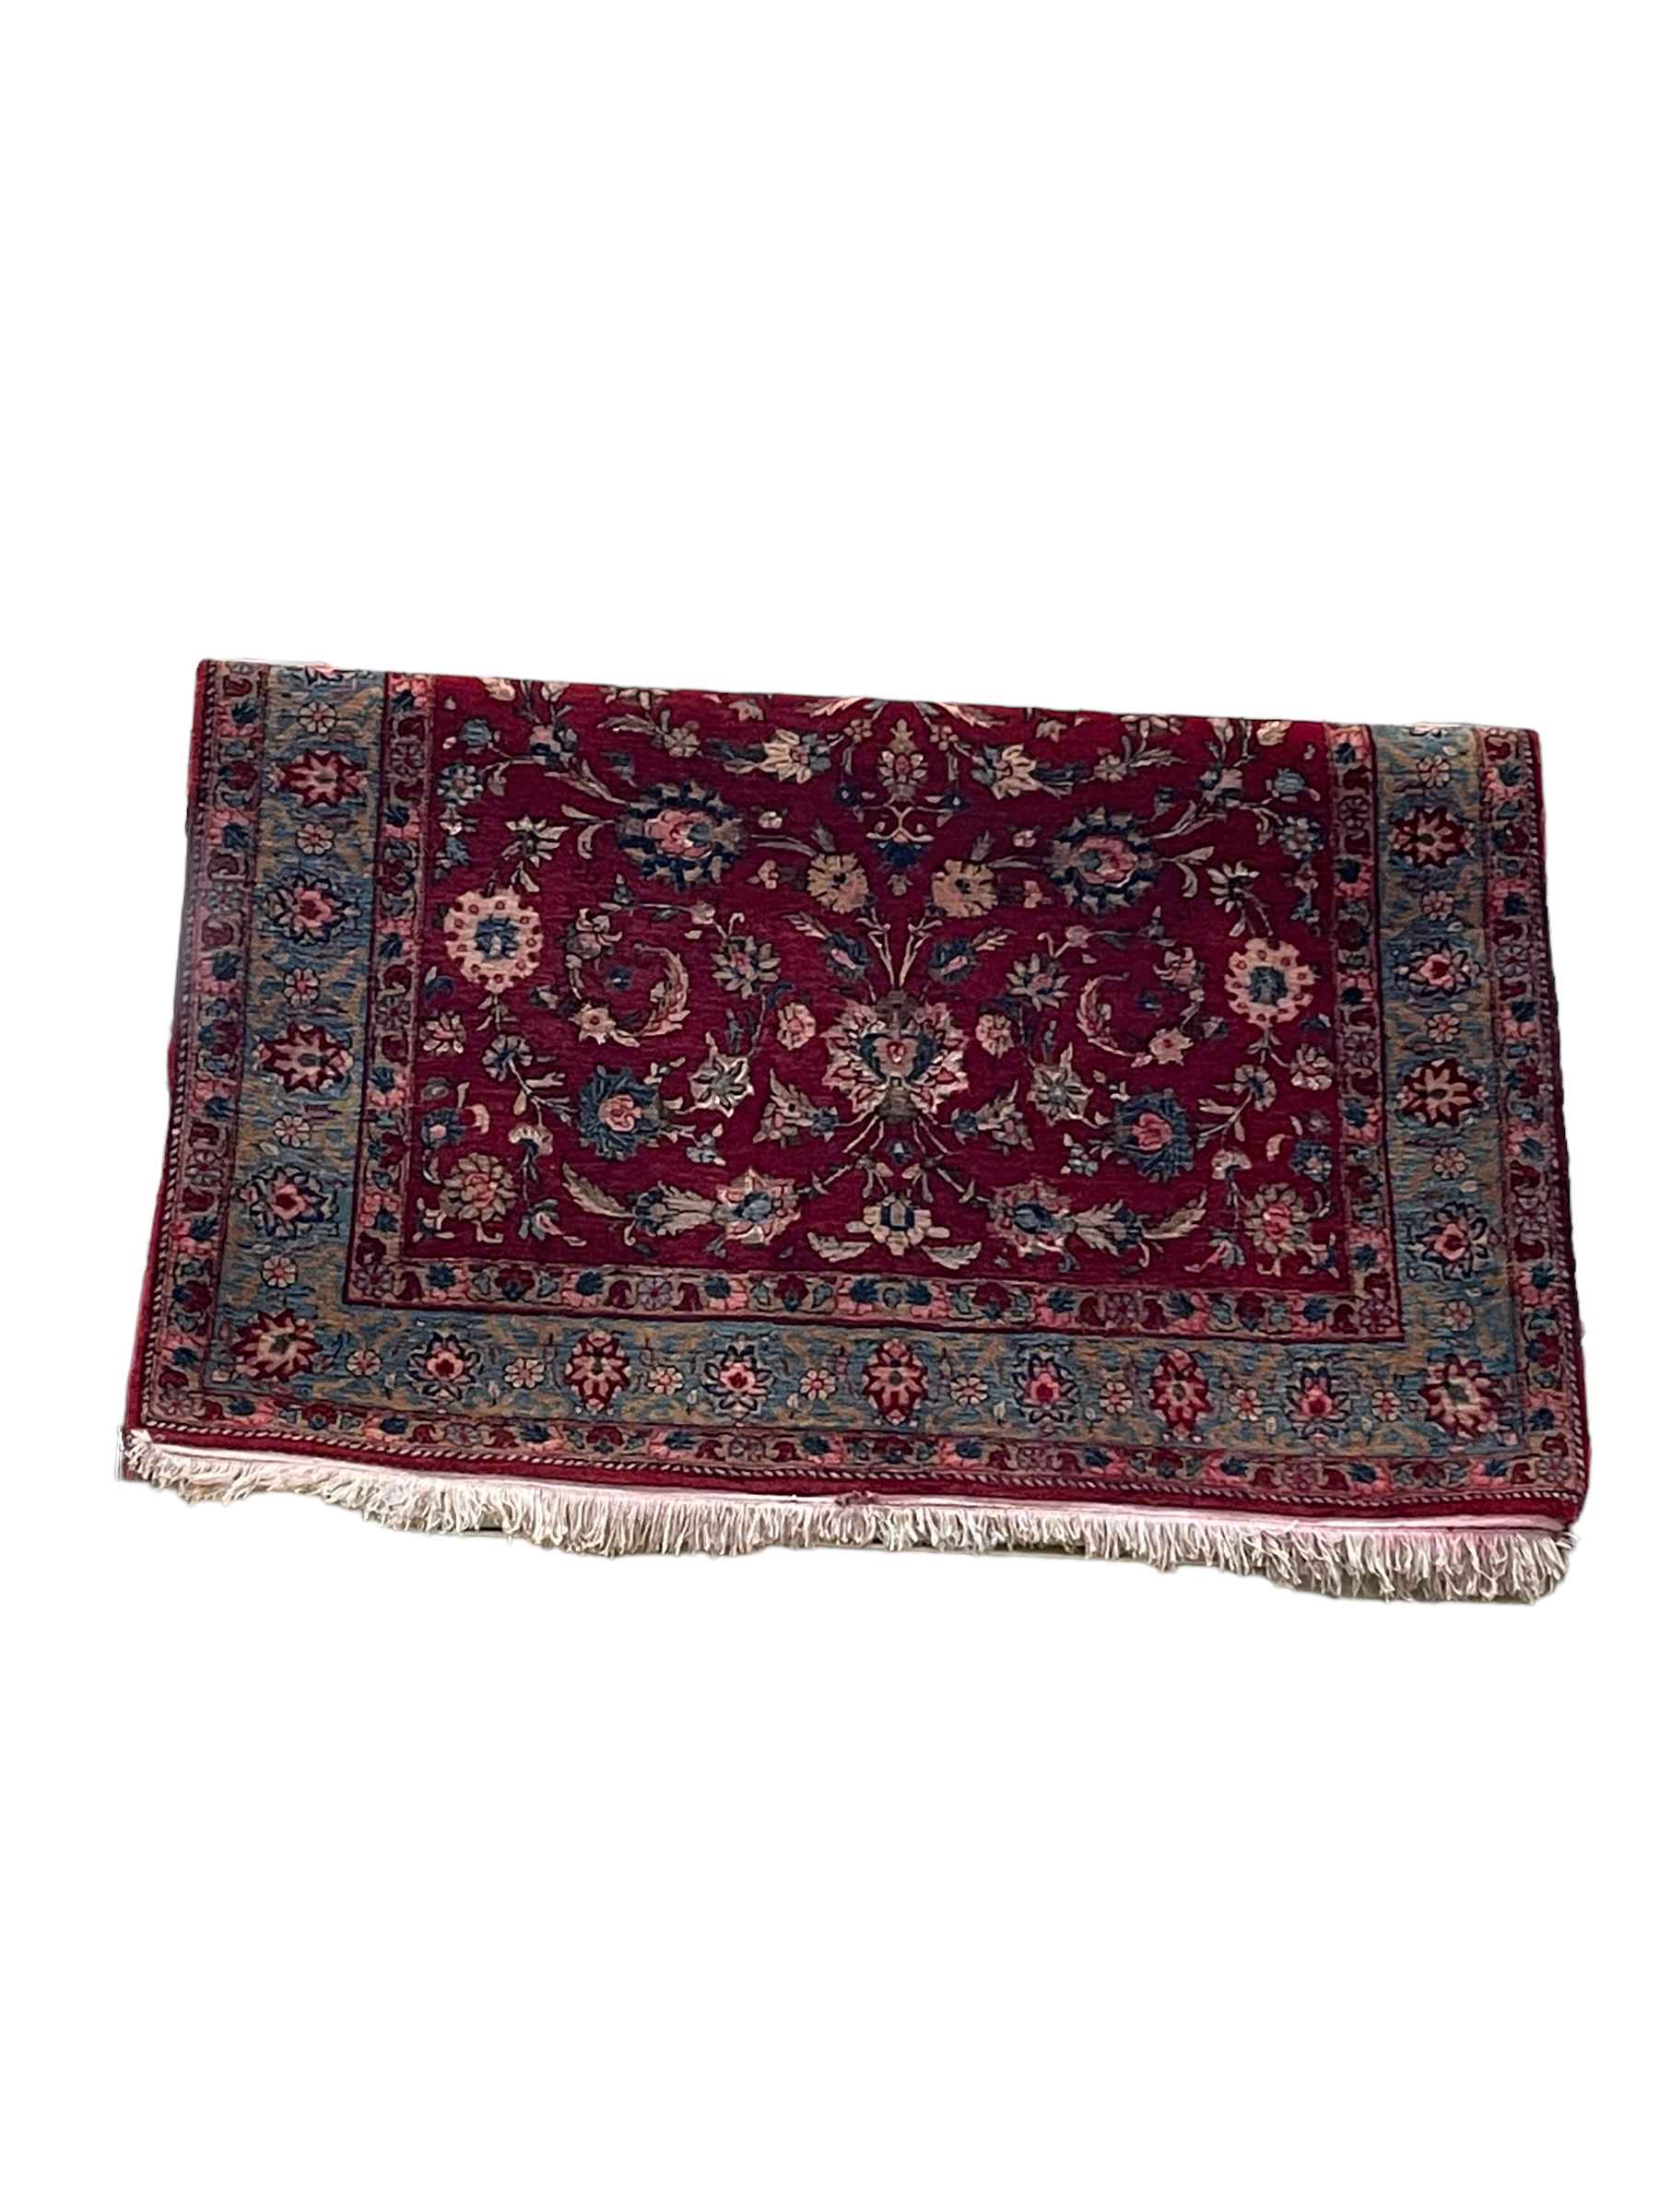 Hand woven Iranian rug, 2.20 by 1.37.